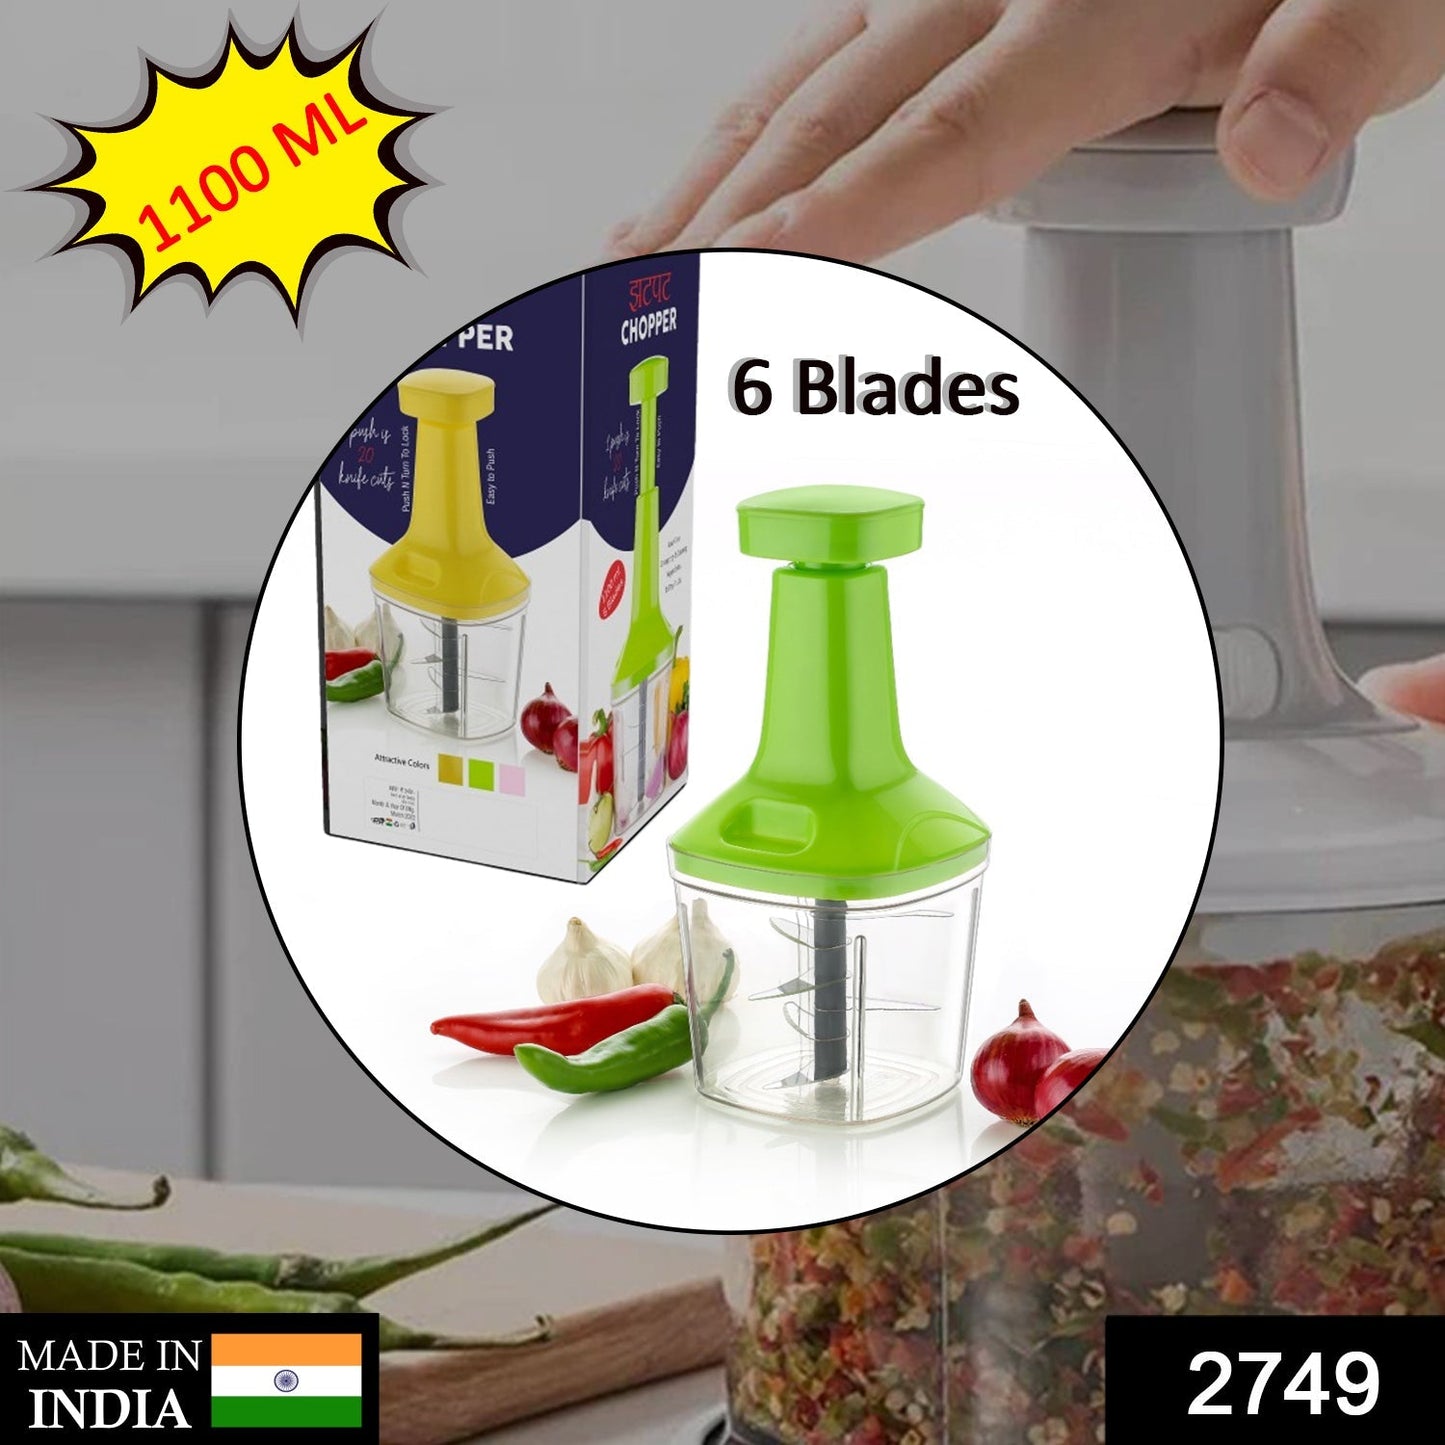 2749 Push N Chop 1100 ML used for chopping and cutting of types of vegetables and fruits easily without any difficulty and it can be used in all kinds of household and official kitchen places etc.